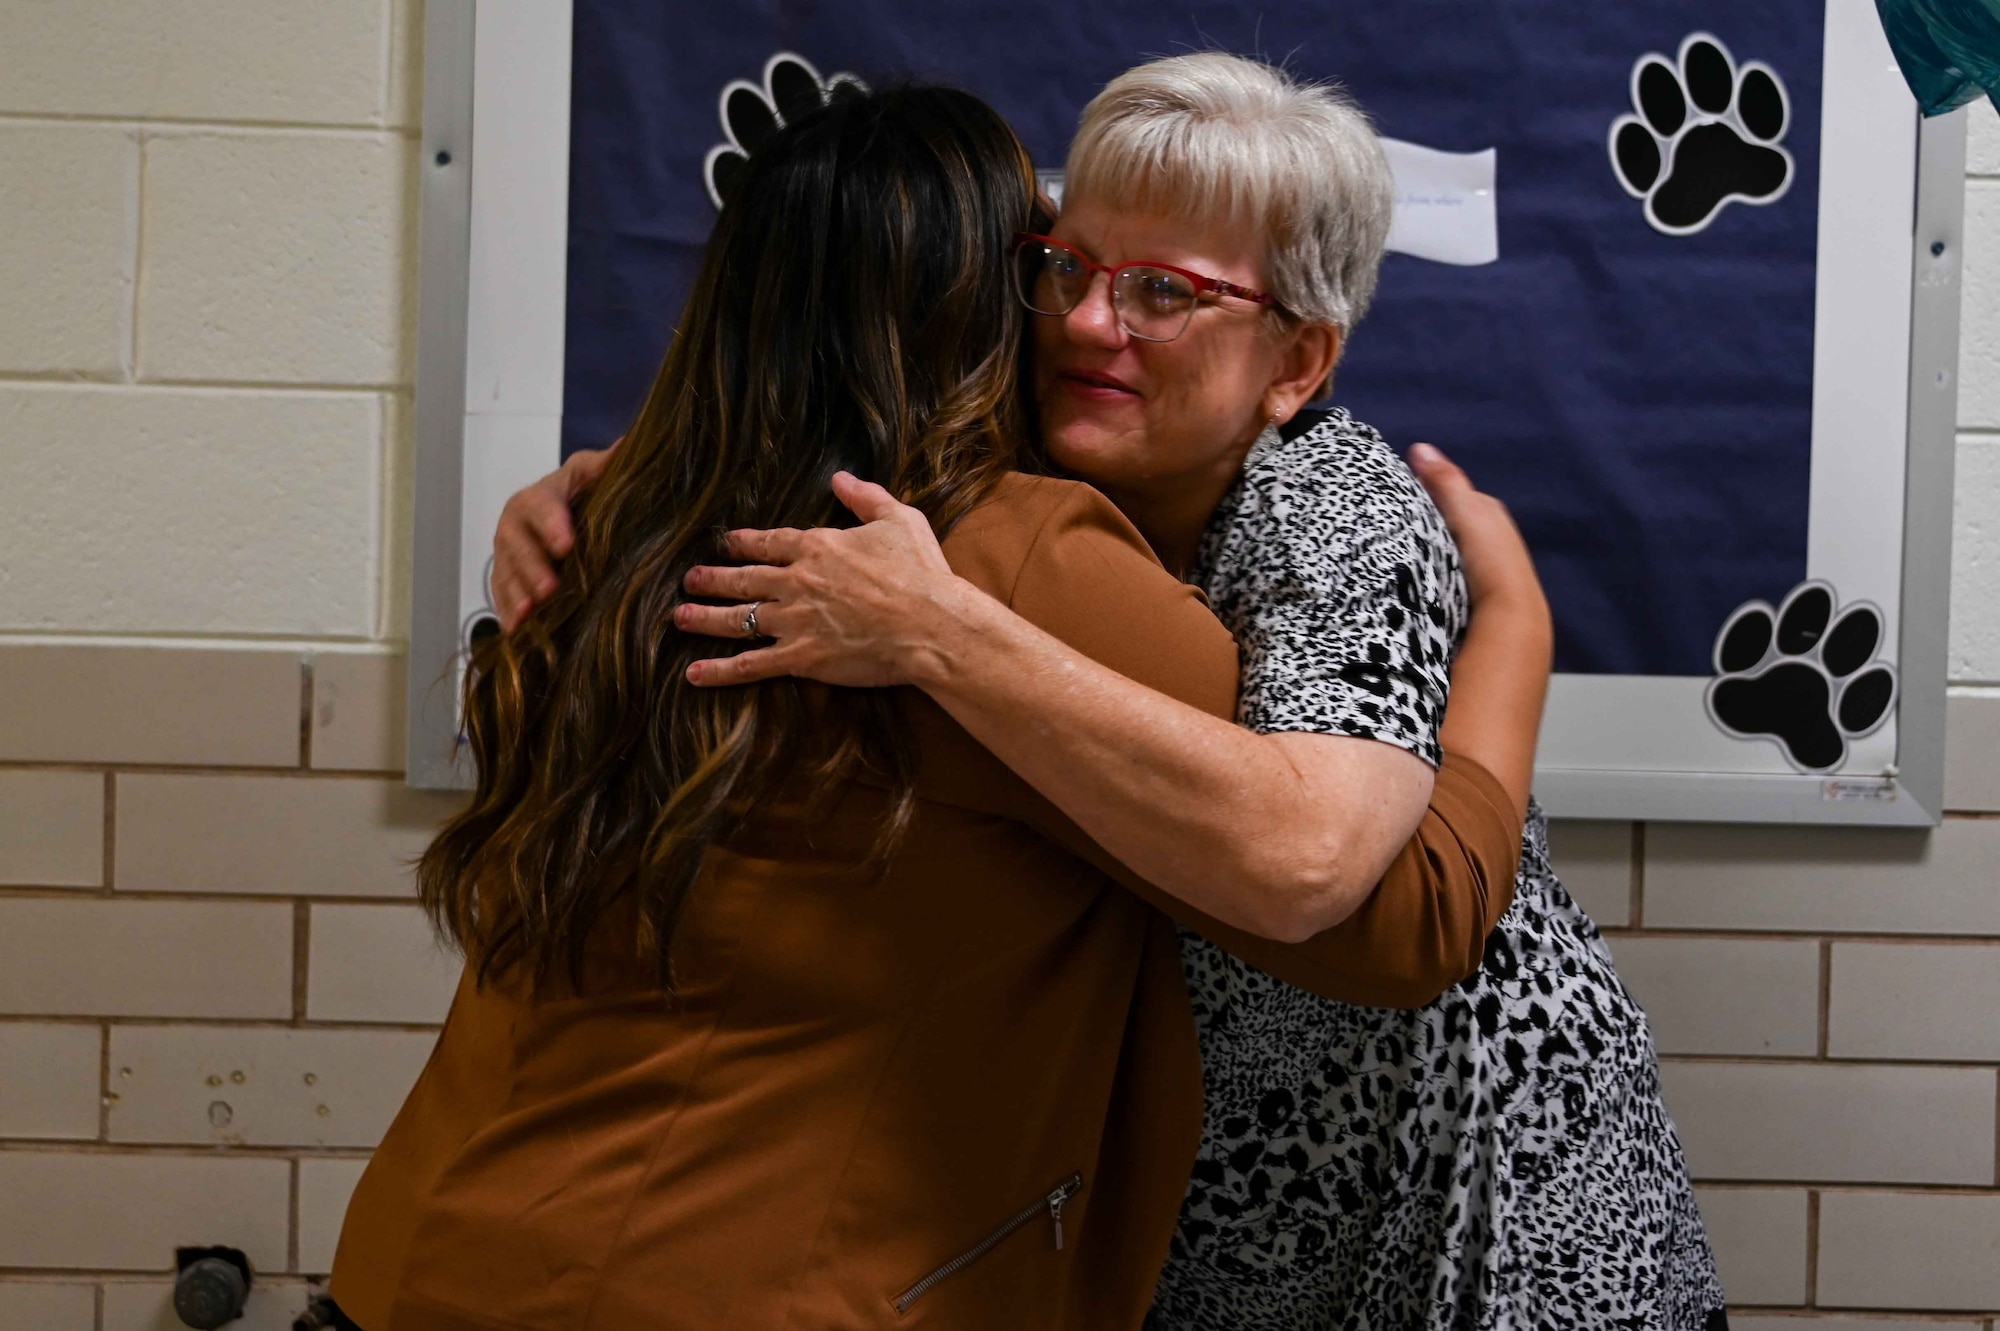 Gwendolyn Brakebill, 97th Force Support Squadron school liaison program manager, hugs Paula Davis, a teacher’s aide at L. Mendel Rivers Elementary School, Altus, Oklahoma, Aug. 7, 2023. Brakebill said she wanted to move into the school liaison program manager position to ensure easier transitions into schools for service members and their children. (U.S. Air Force photo by Airman 1st Class Kari Degraffenreed)